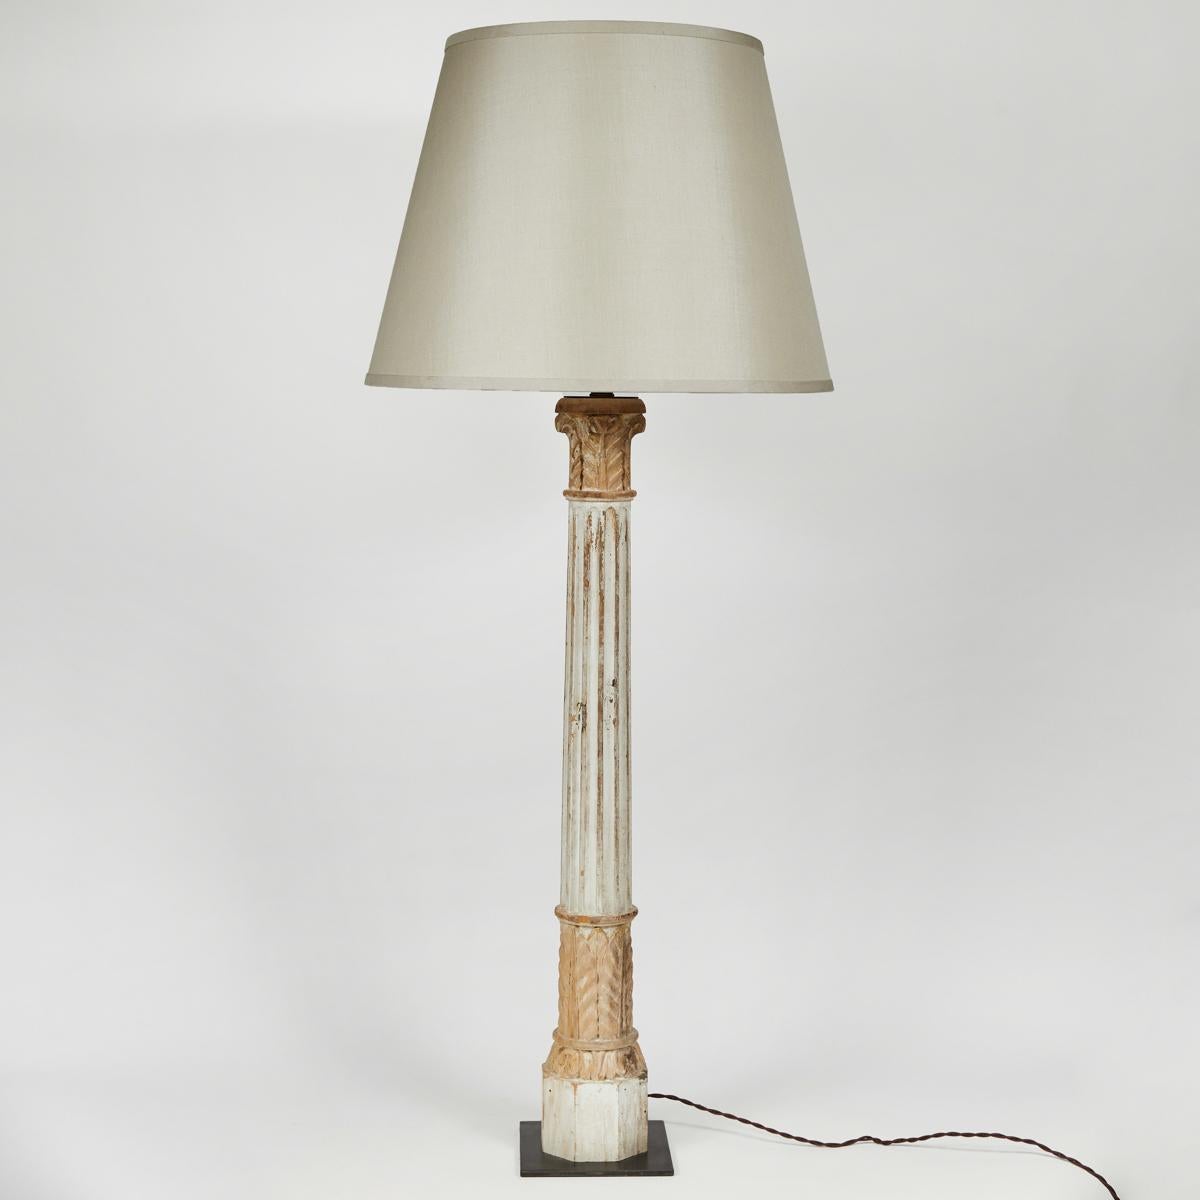 Rustic white painted carved wooden column lamp from 19th-century France. Featuring acanthus leaf carvings, Corinthian capitals, and a custom cream linen shade, this charming lamp brightens any space.

France, circa 1880

Dimensions: 6W x 18D x 44H